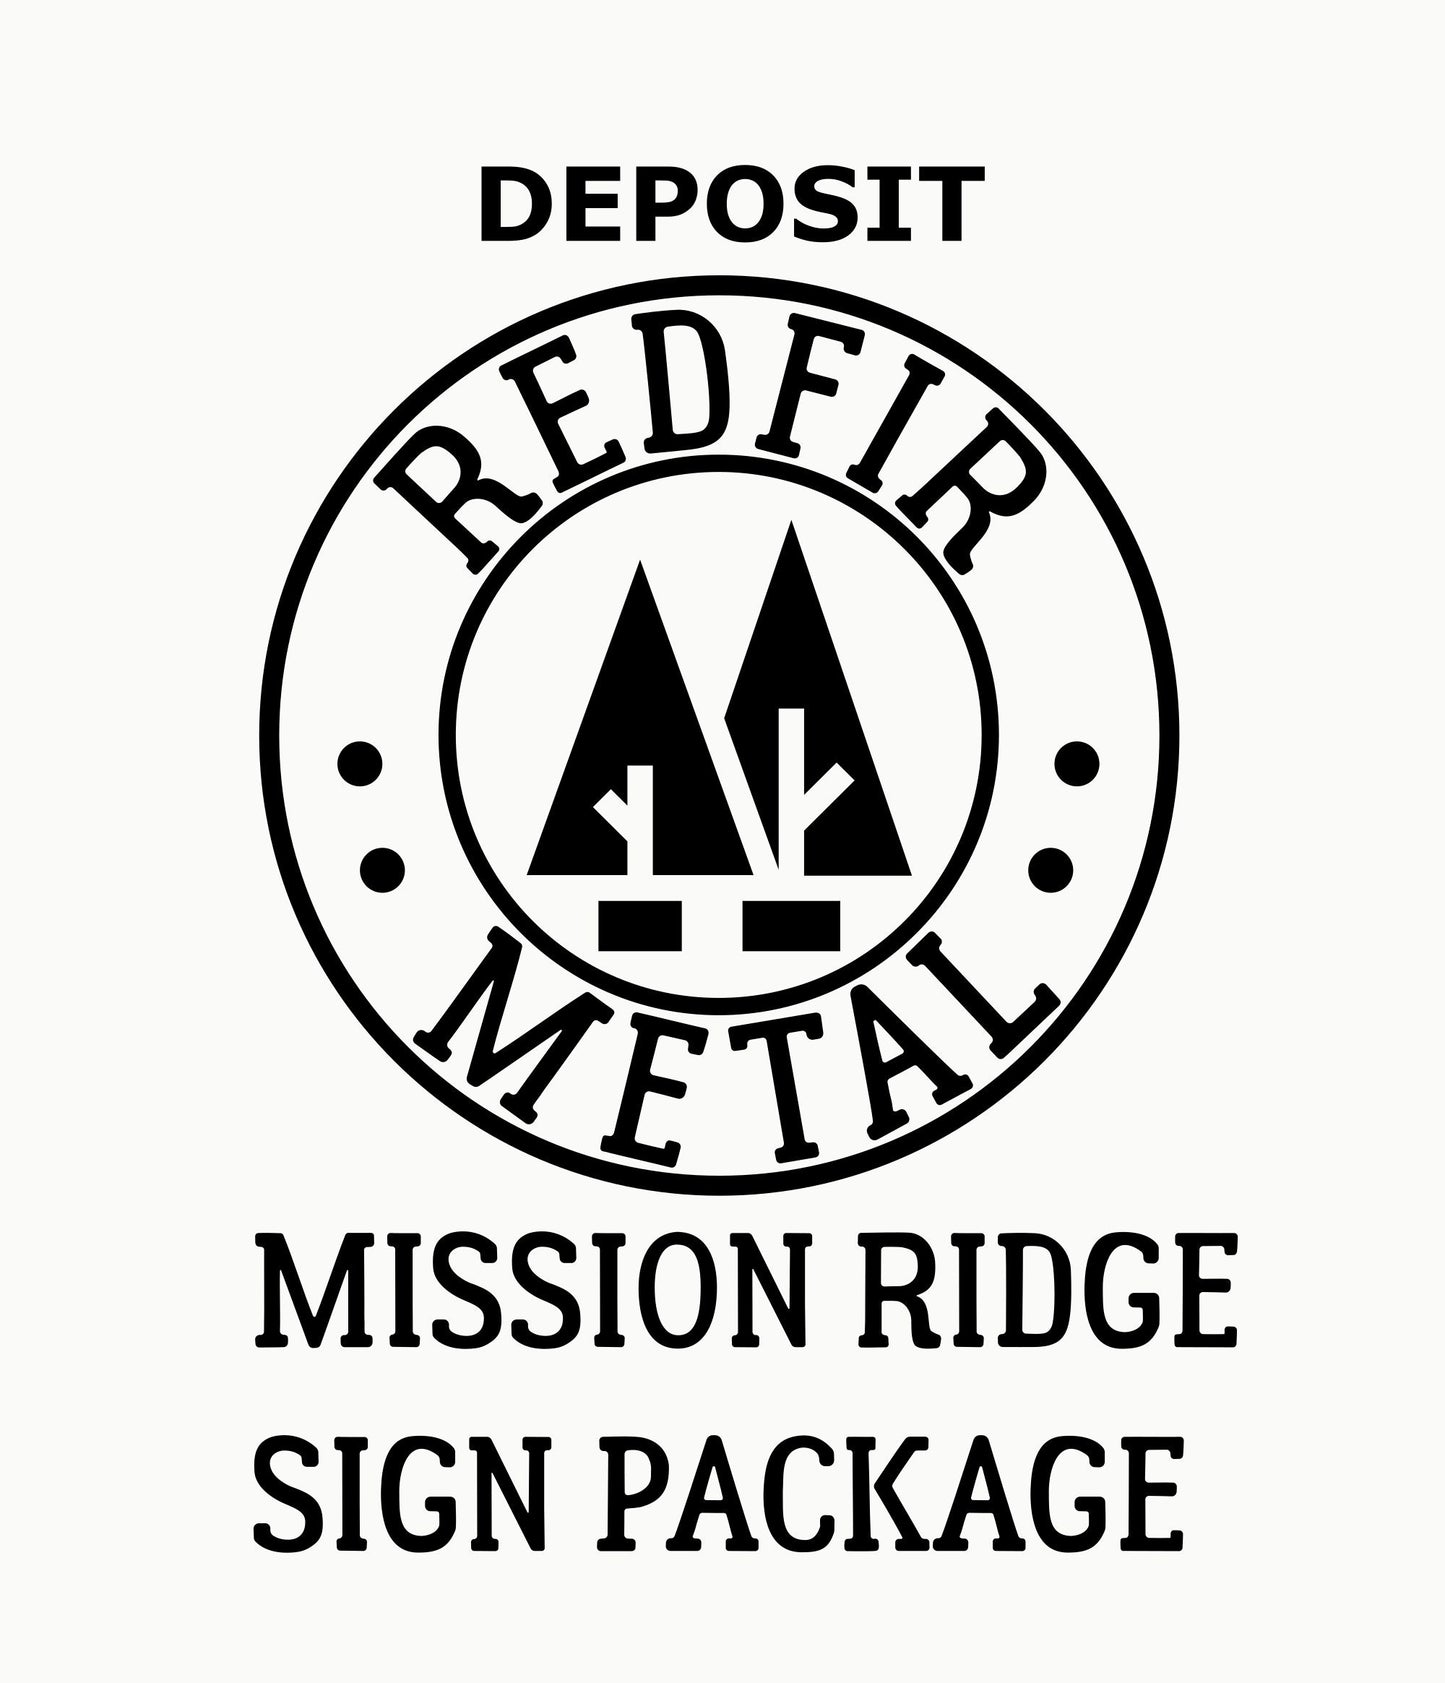 DEPOSIT for Mission Ridge, Custom Metal Signs and Mounting Brackets